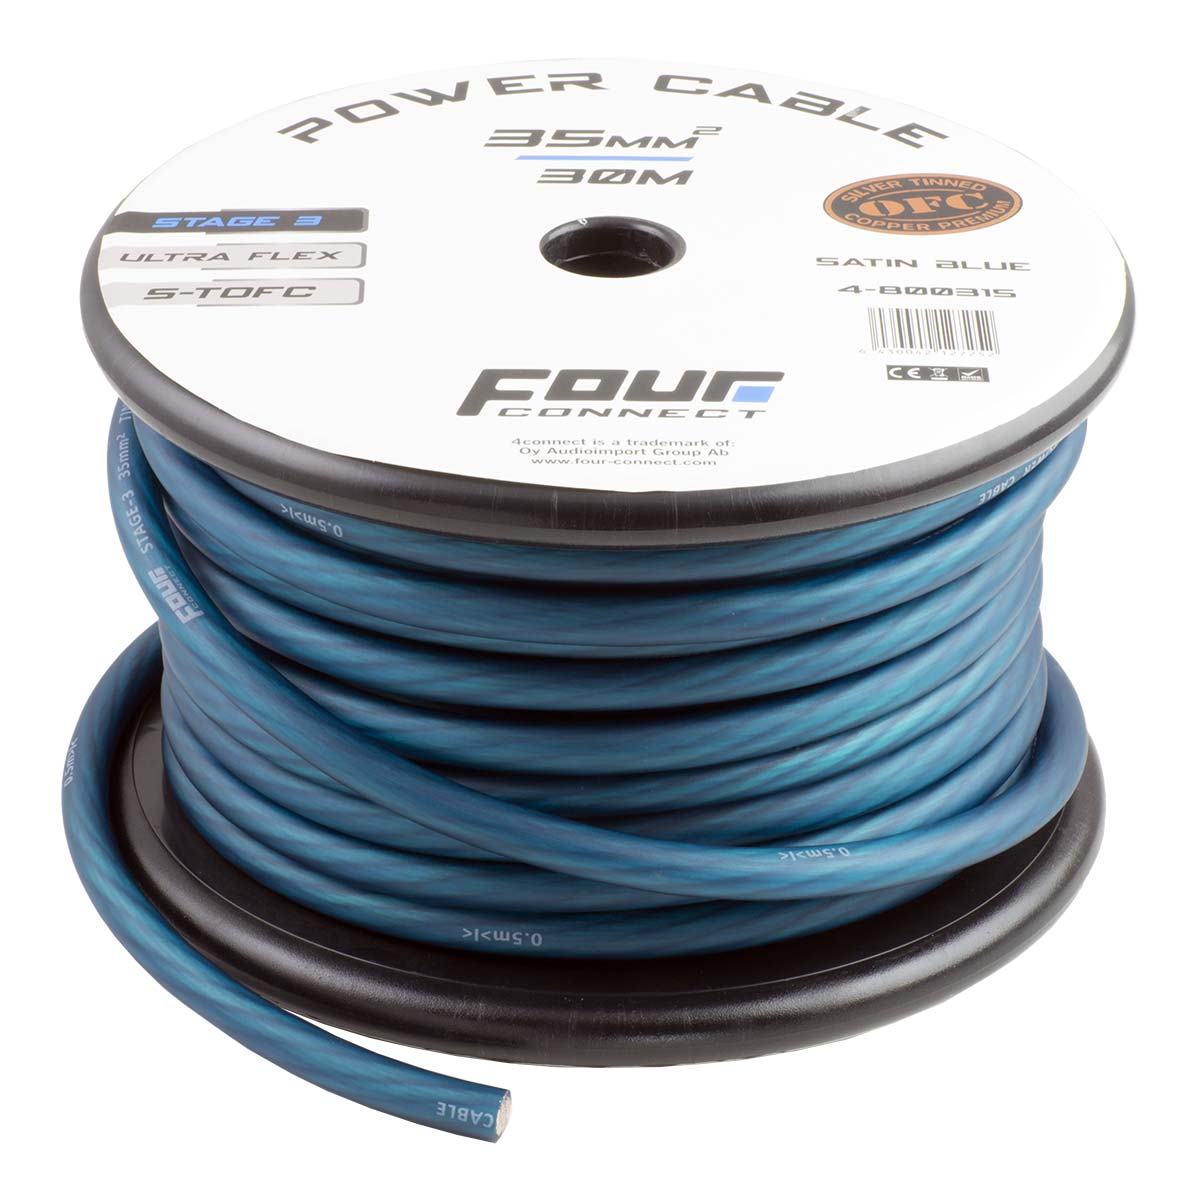 FOUR Connect 4-800315 STAGE3 35mm2 Satin Blue S-TOFC virtakaapeli, 30m